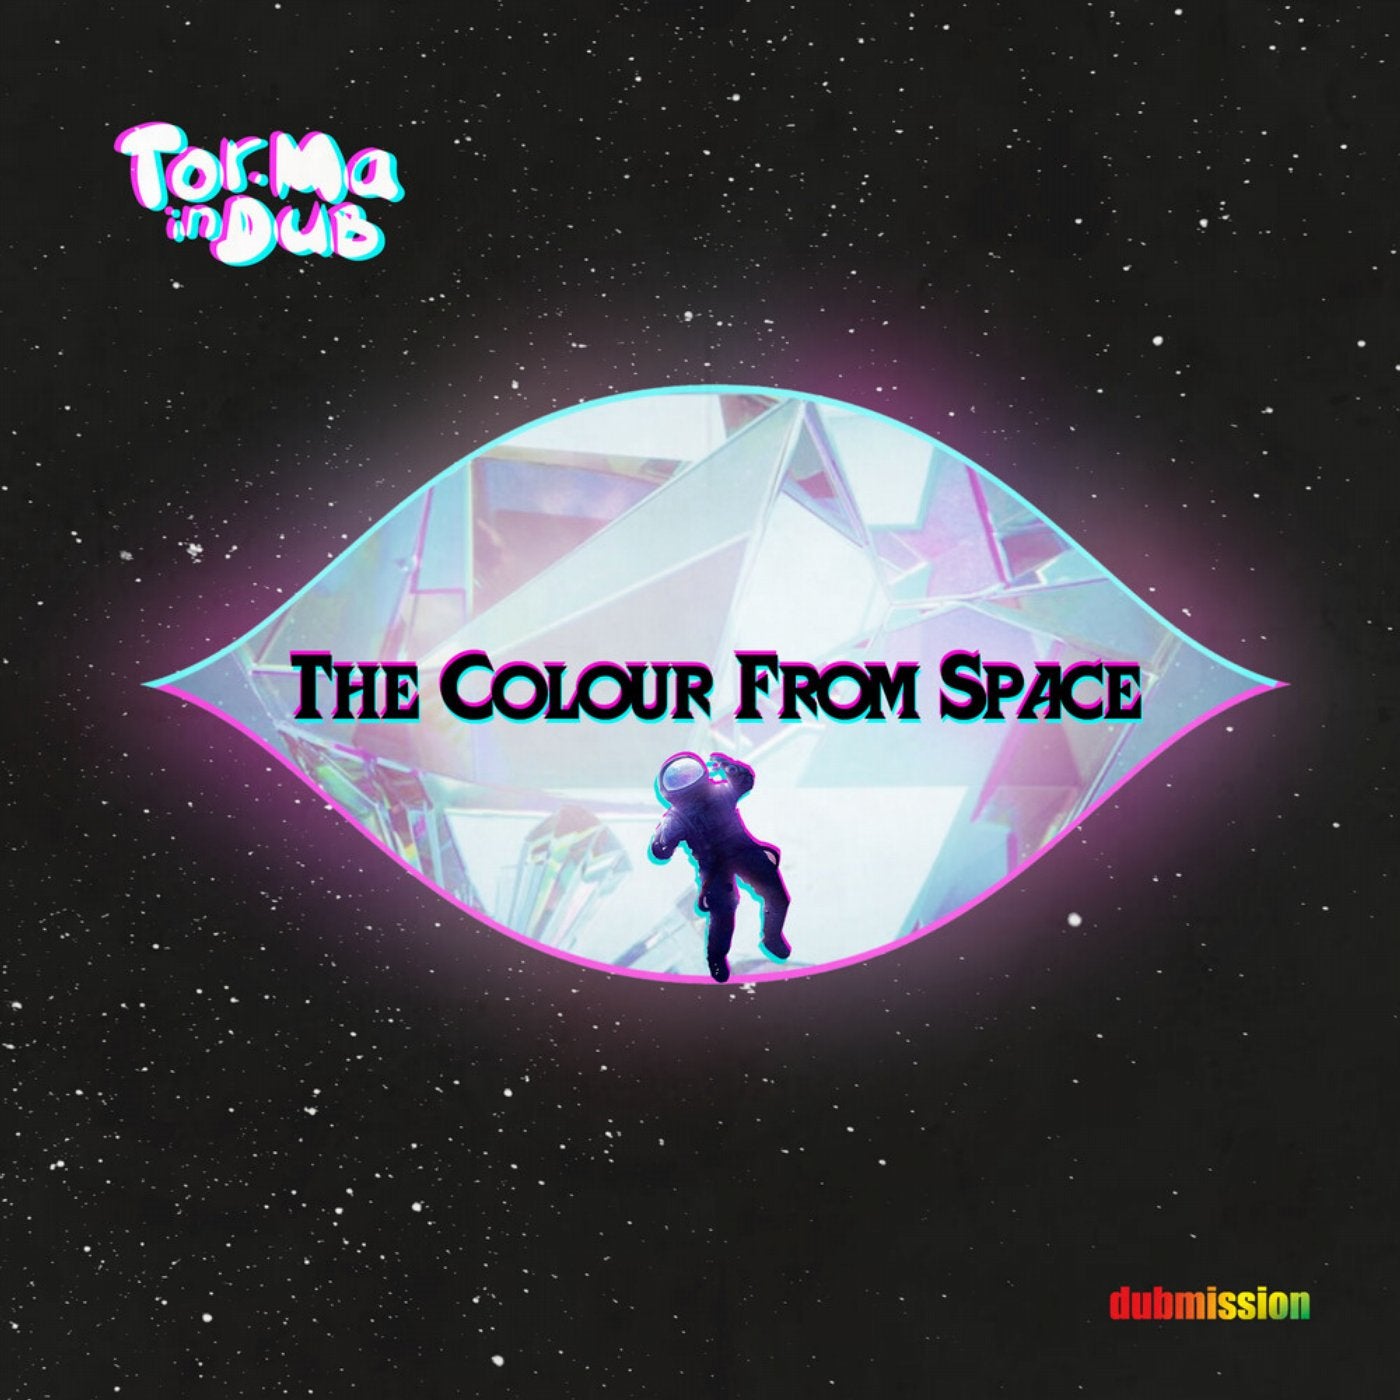 The Colour from Space